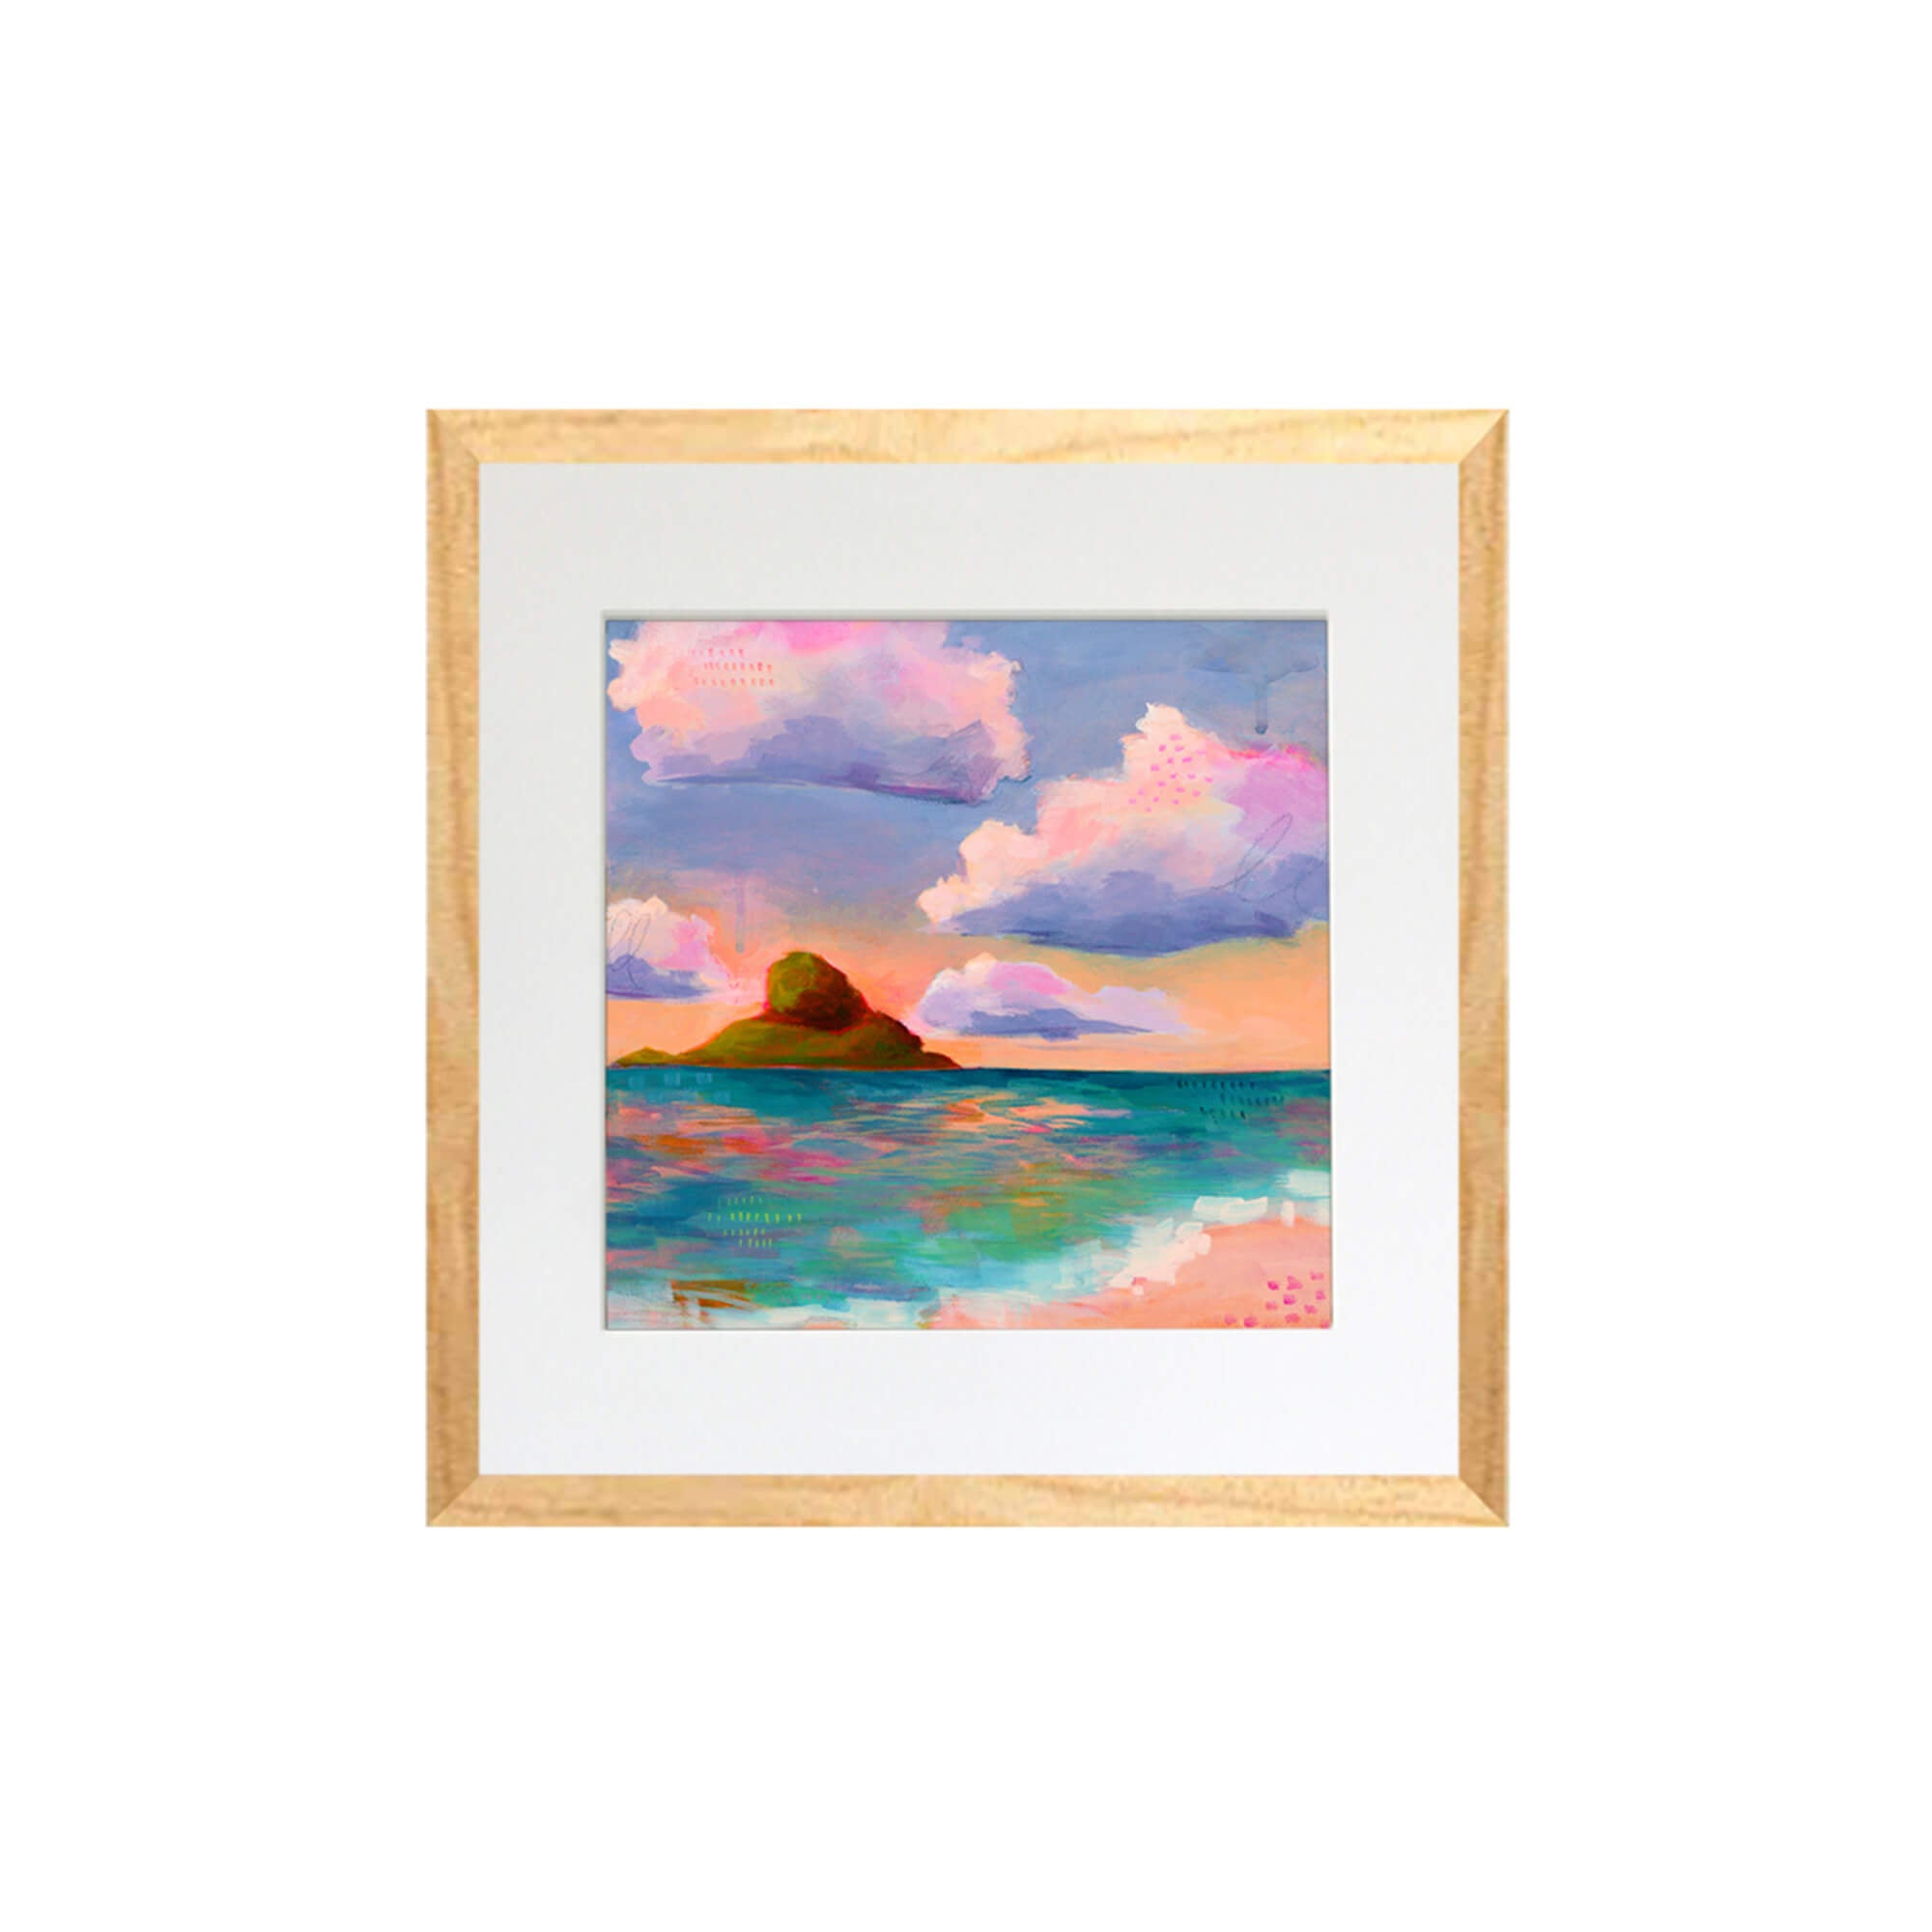 A dream-like seascape and horizon with vibrant colors by Hawaii artist Lindsay Wilkins